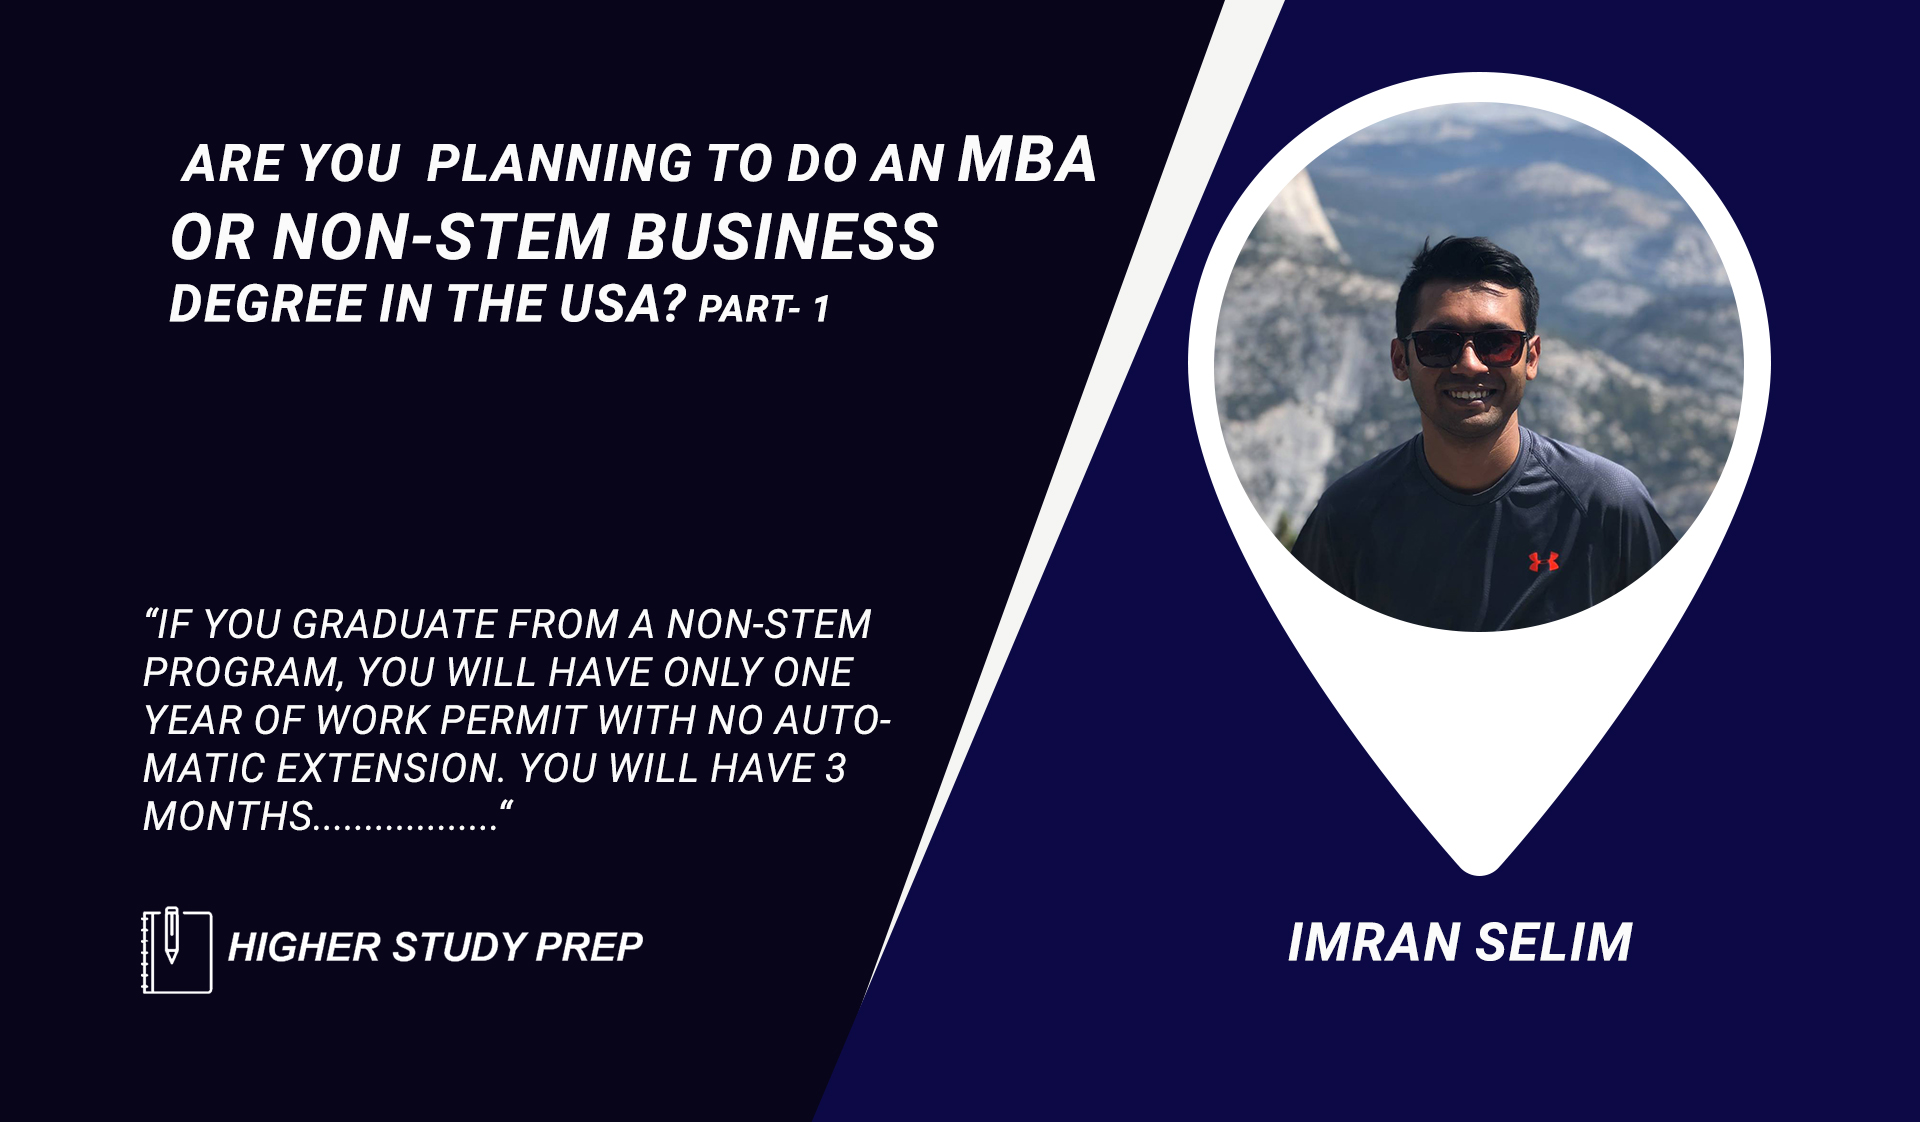 Are you planning to do an MBA or non-STEM business degree in the USA? Part- 1